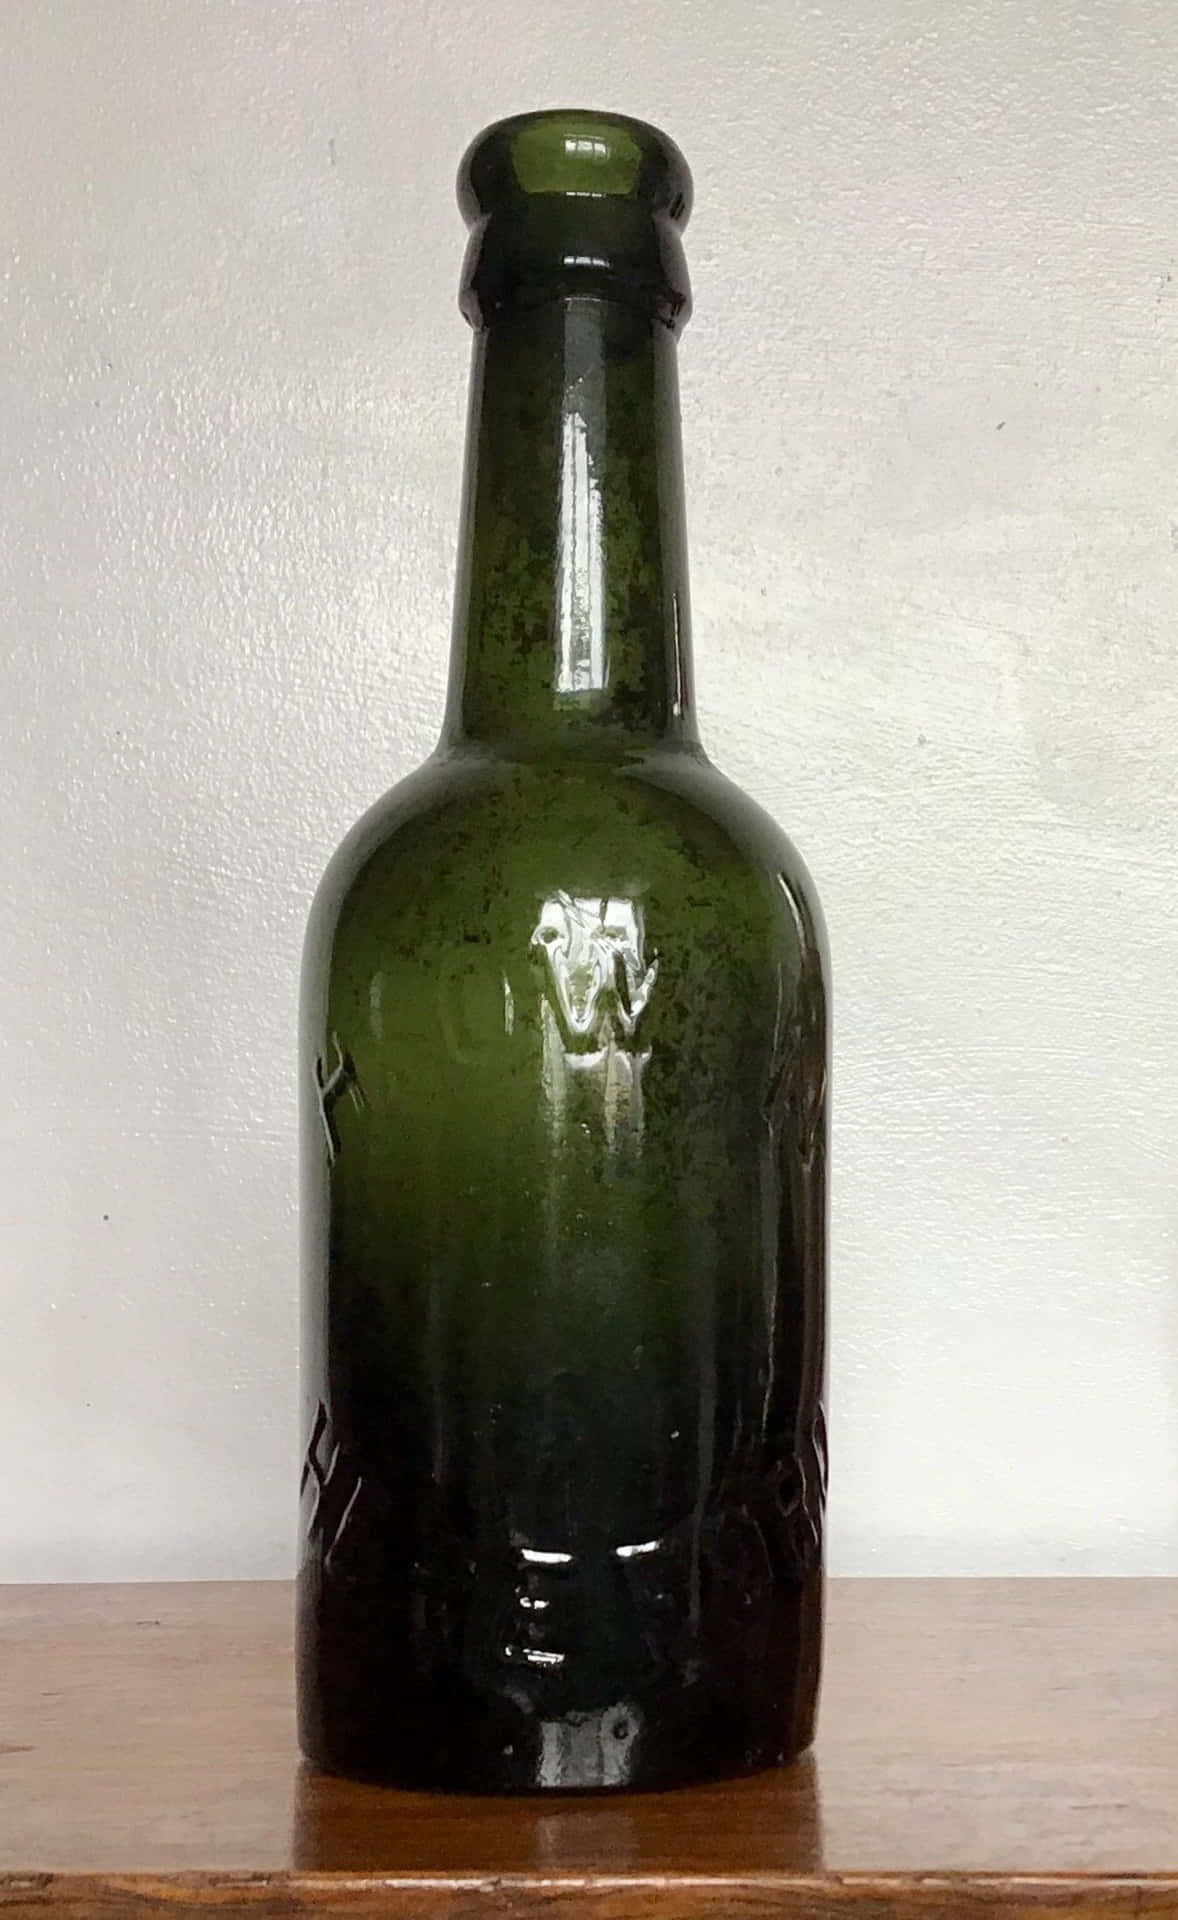 A Green Bottle Sitting On A Wooden Table